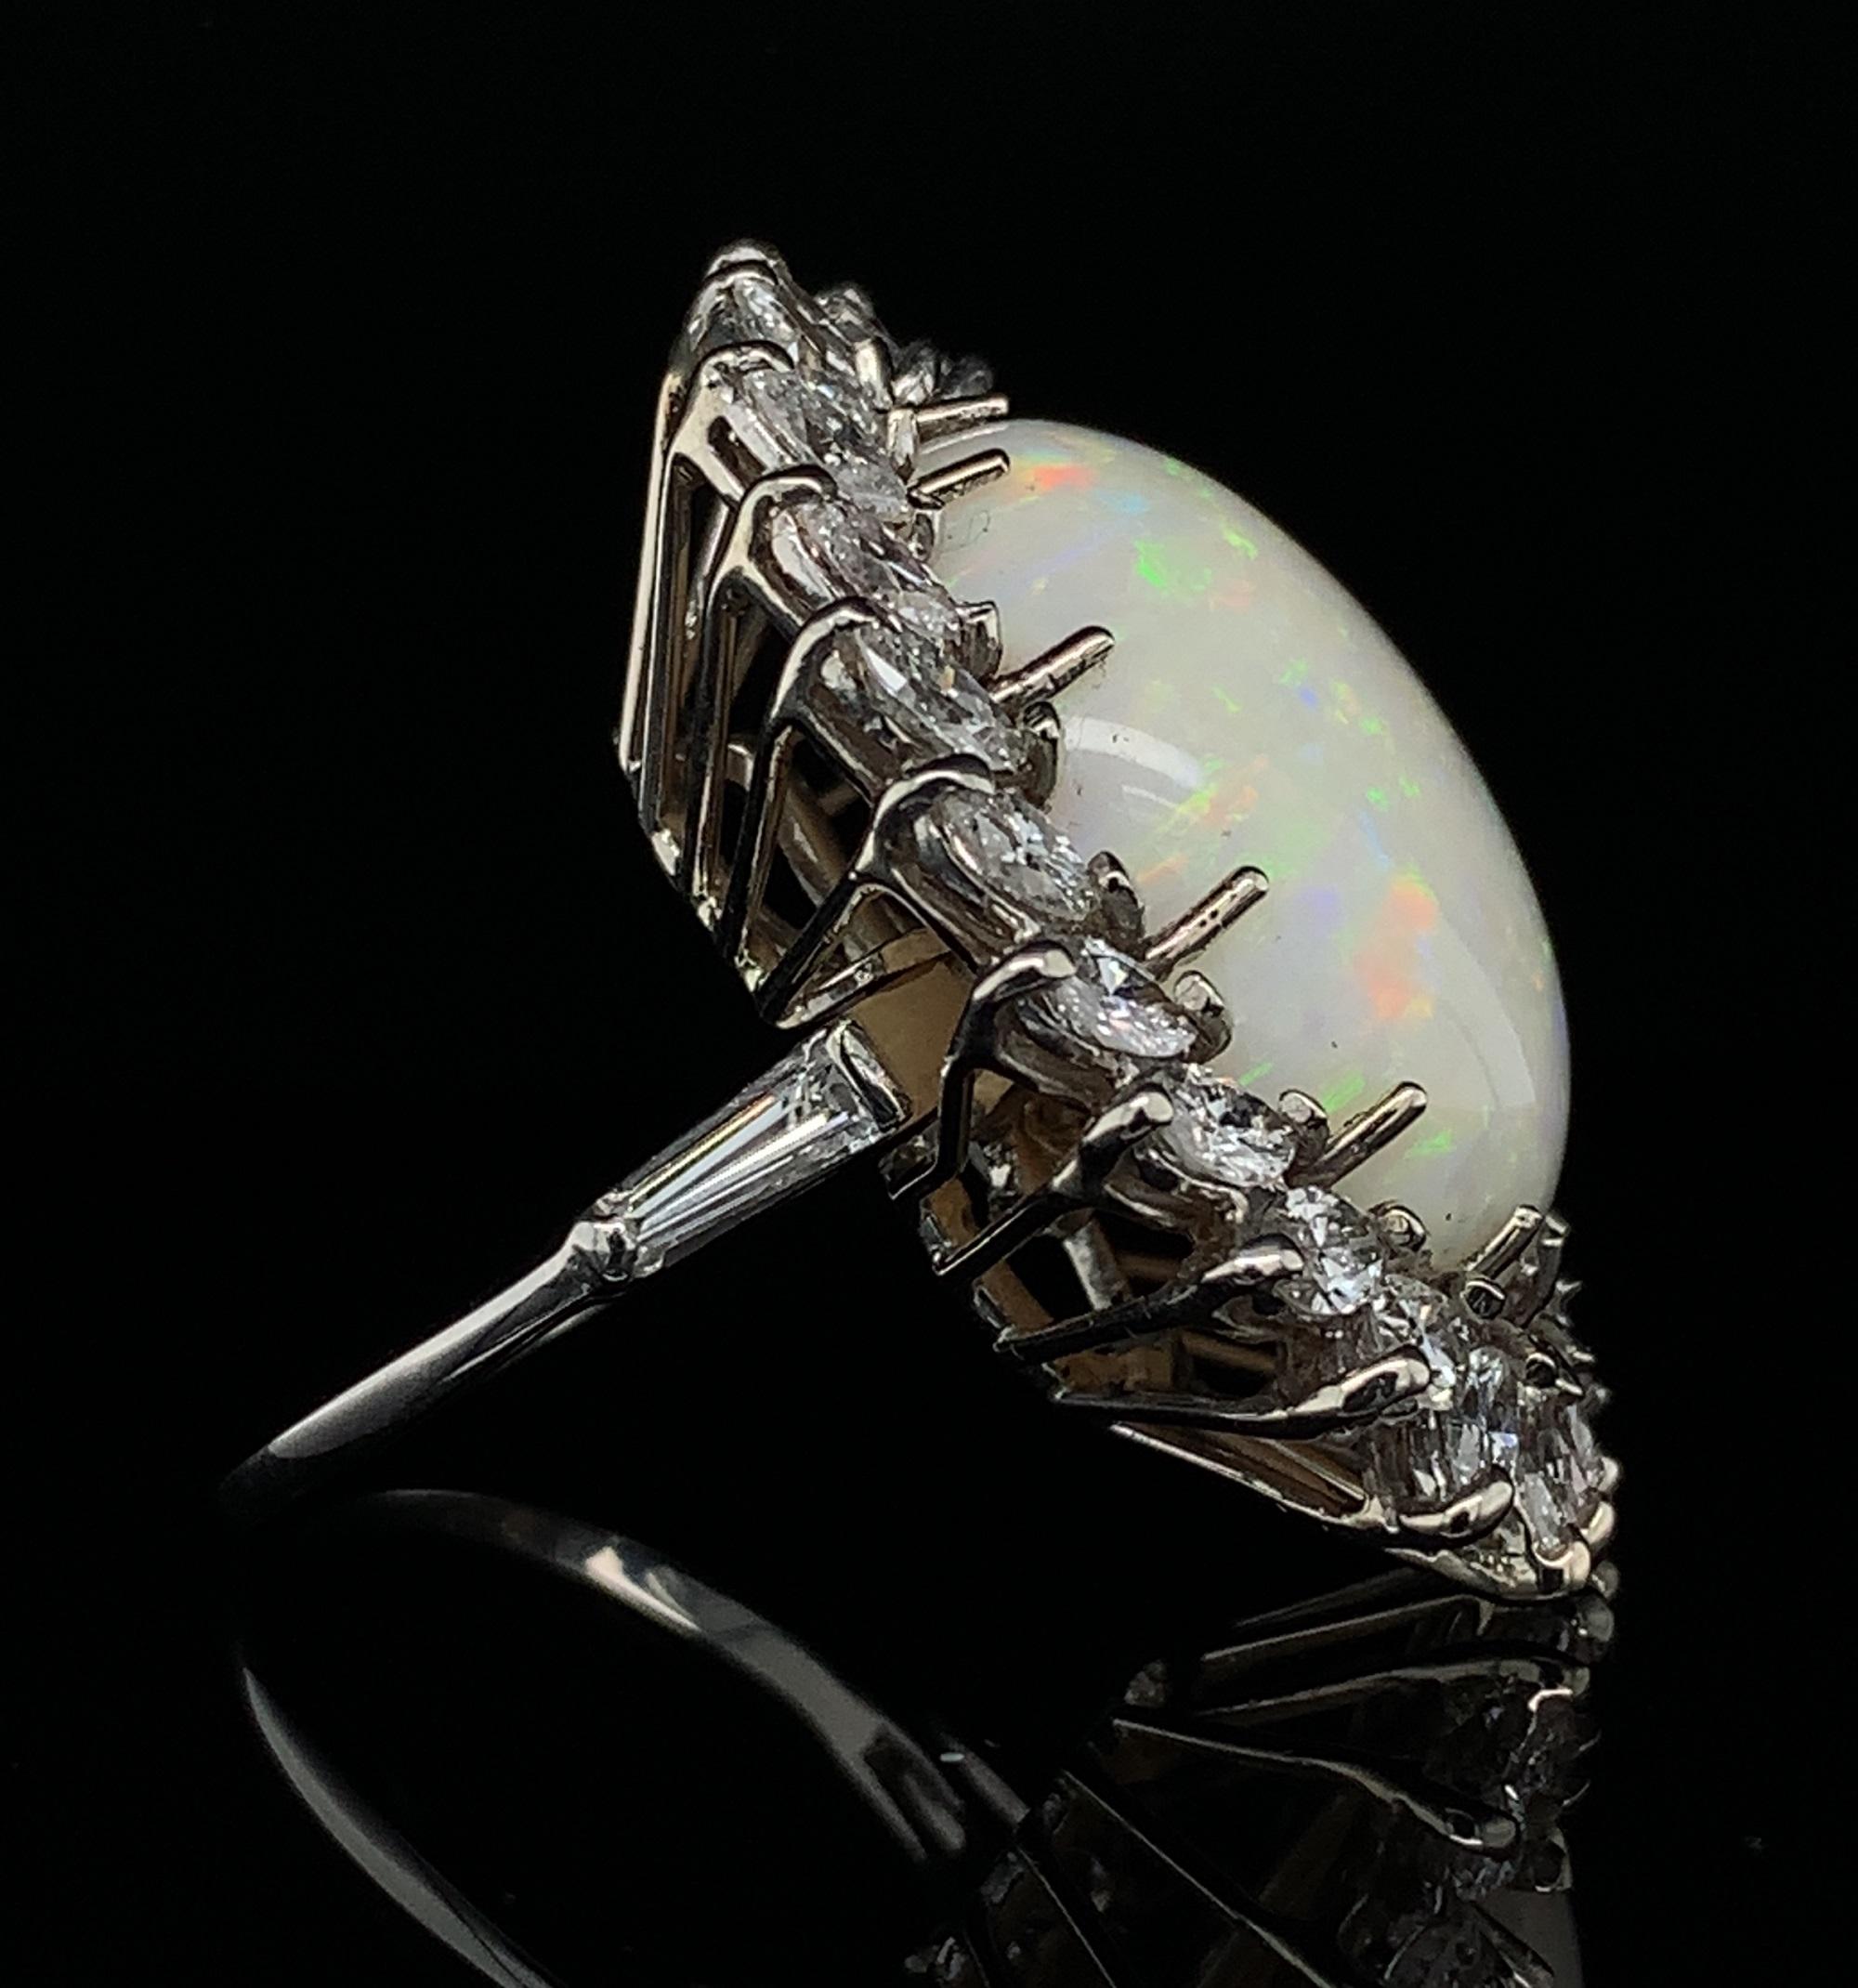 Platinum opal and diamond ring which converts to a pendant. There is a locking mechanism where the shank can be removed and a bail can flip up. The large Australian opal weighs almost 18 carats. It measures about 22mm x 17.5mm. The opal has green,